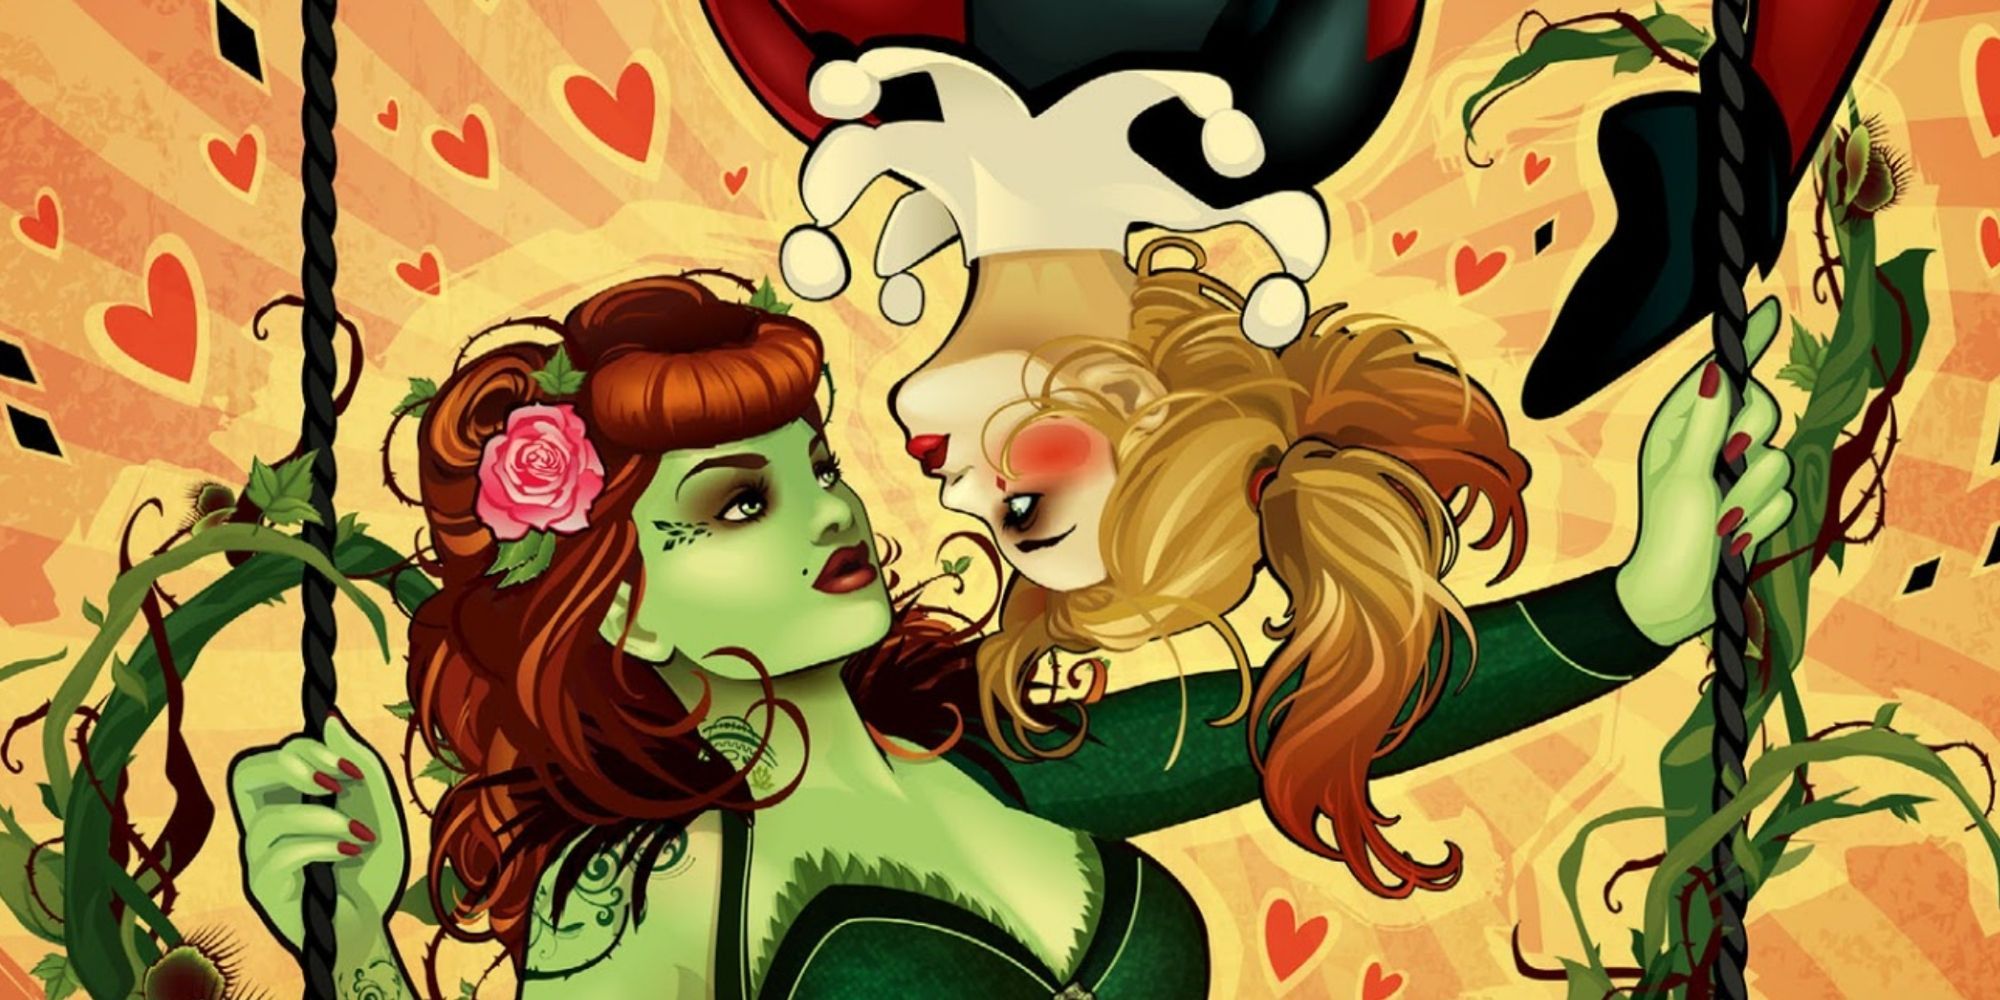 Poison Ivy Sweeps Harley Quinn Off Her Feet In Romantic New Cover